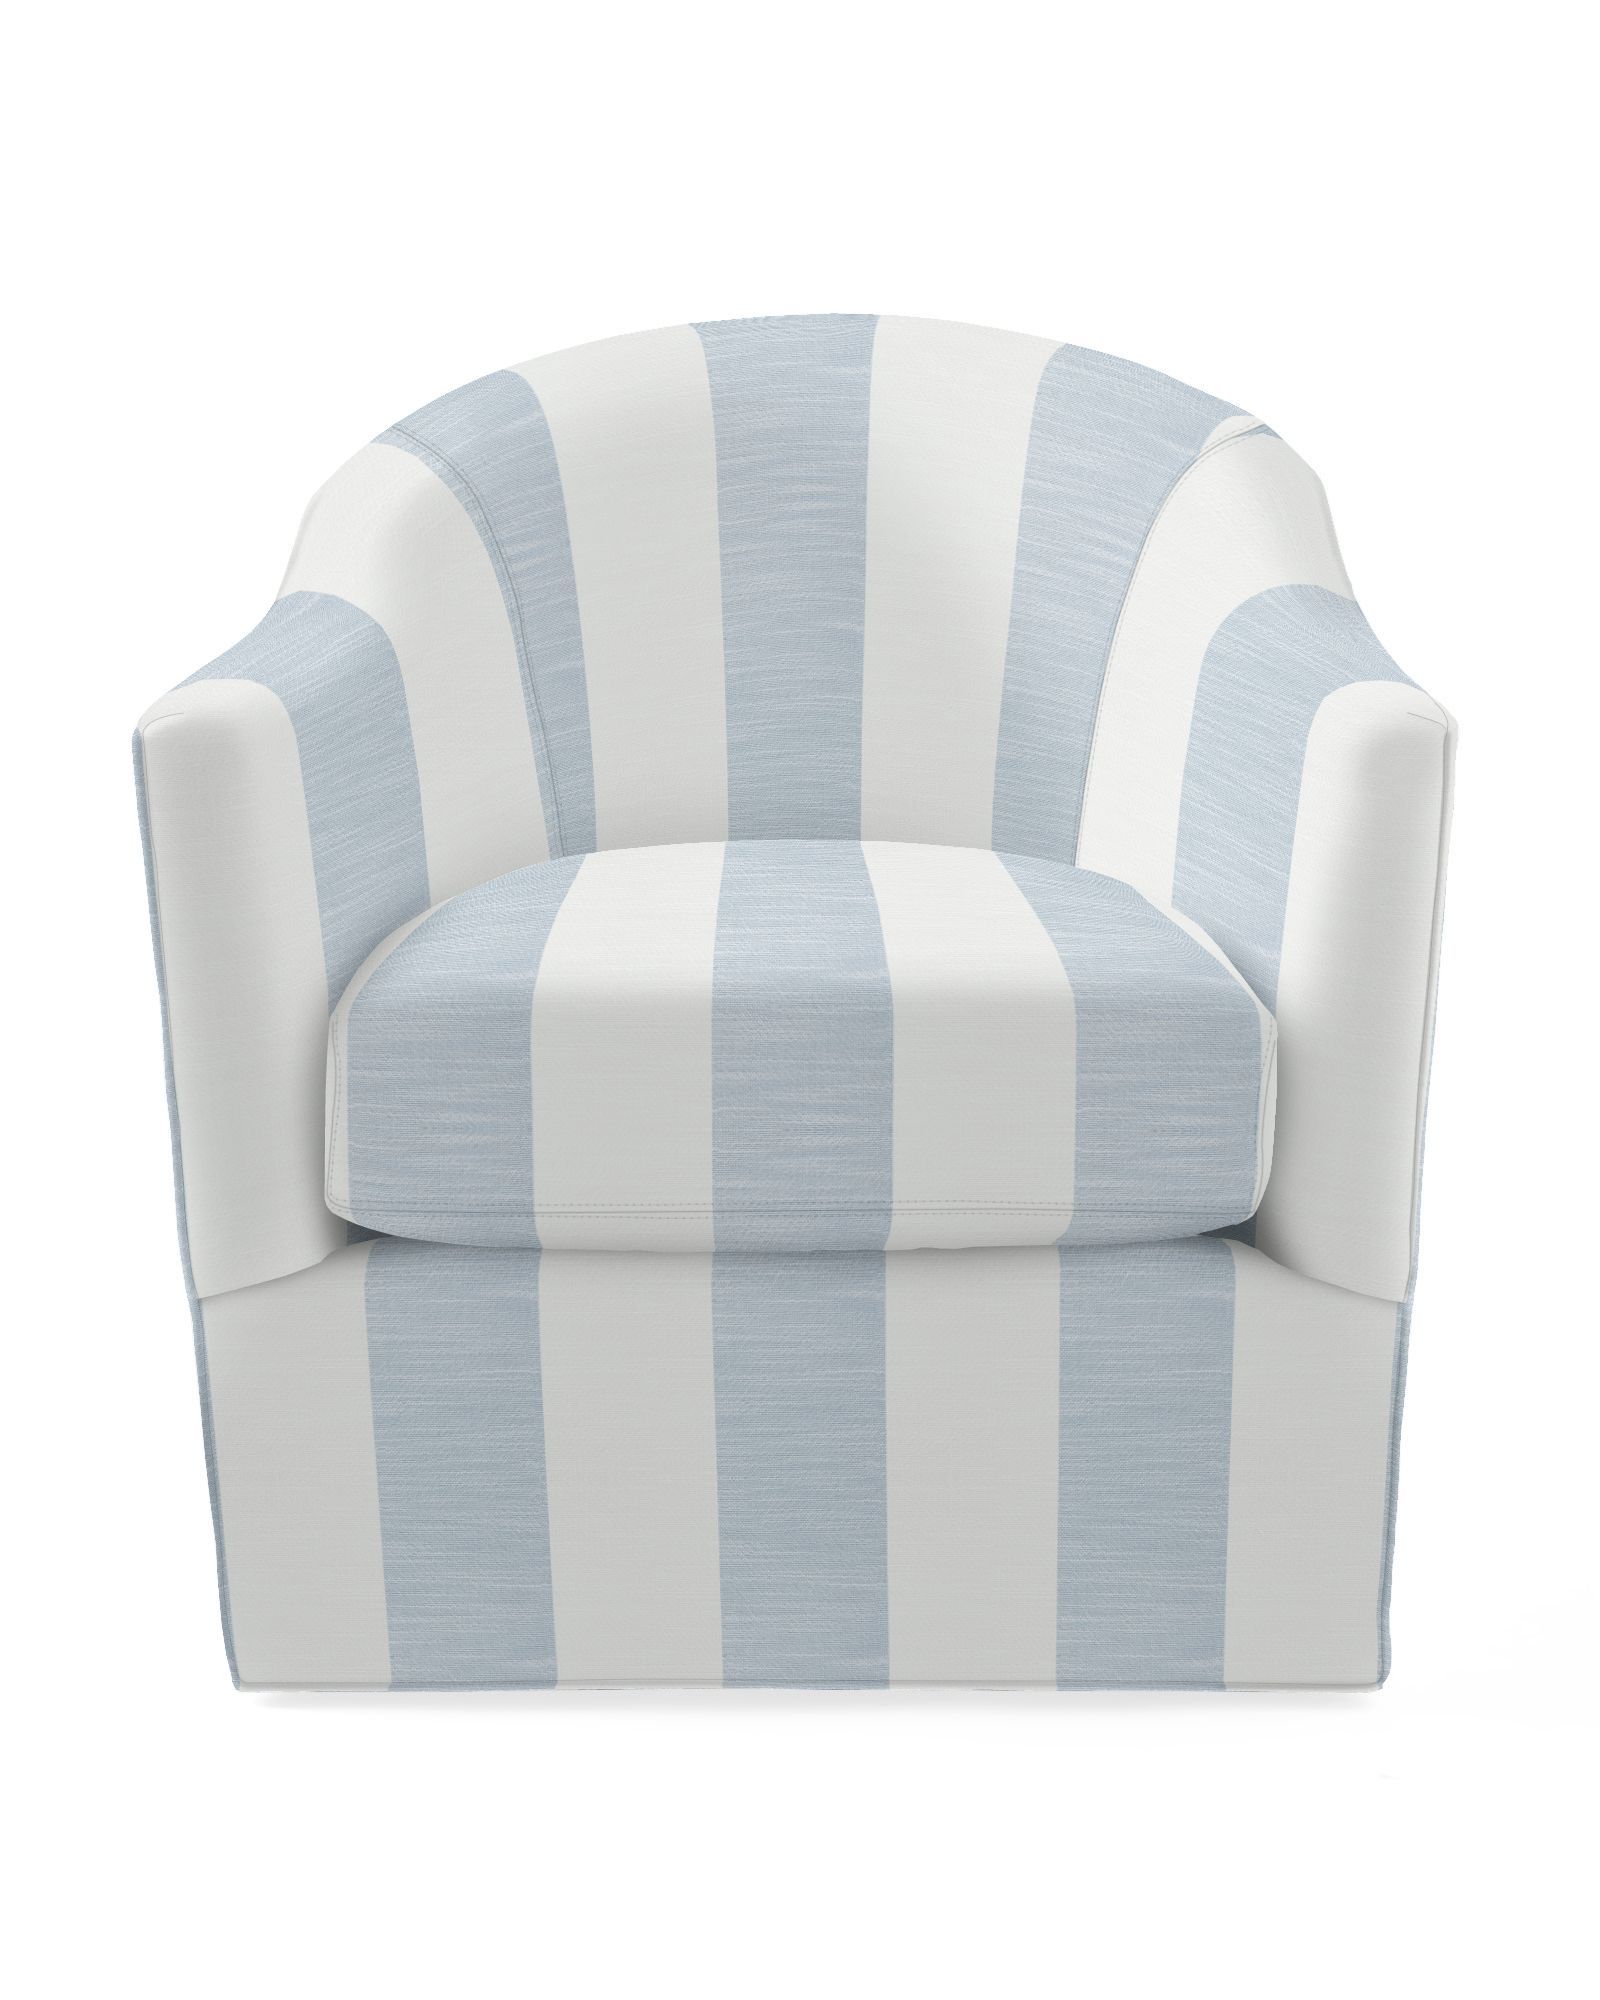 Provence Swivel Chair | Serena and Lily